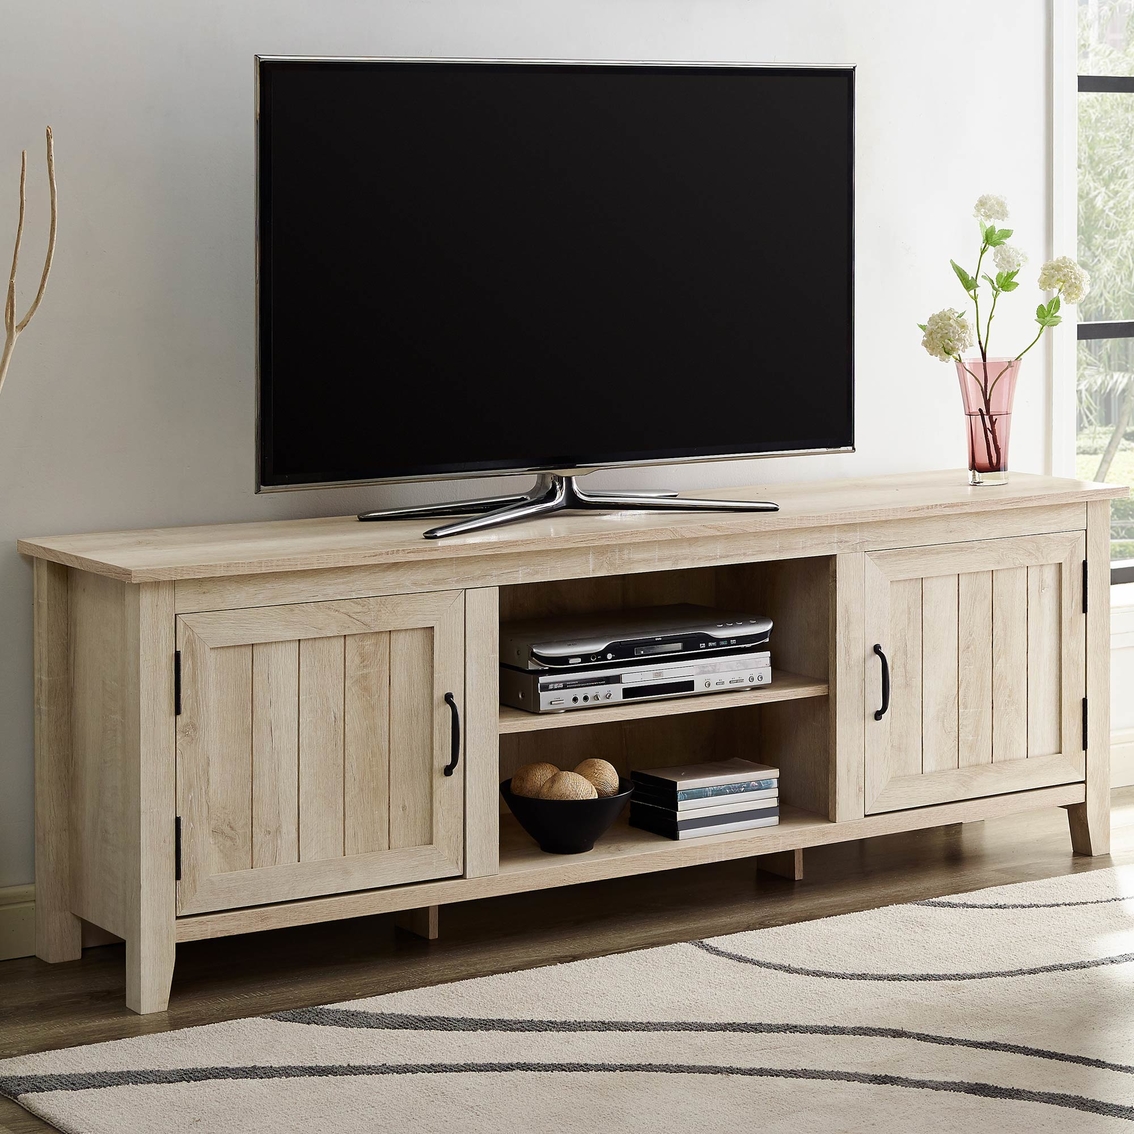 Walker Edison 70 in. Modern Farmhouse TV Stand with Beadboard Doors - Image 4 of 4